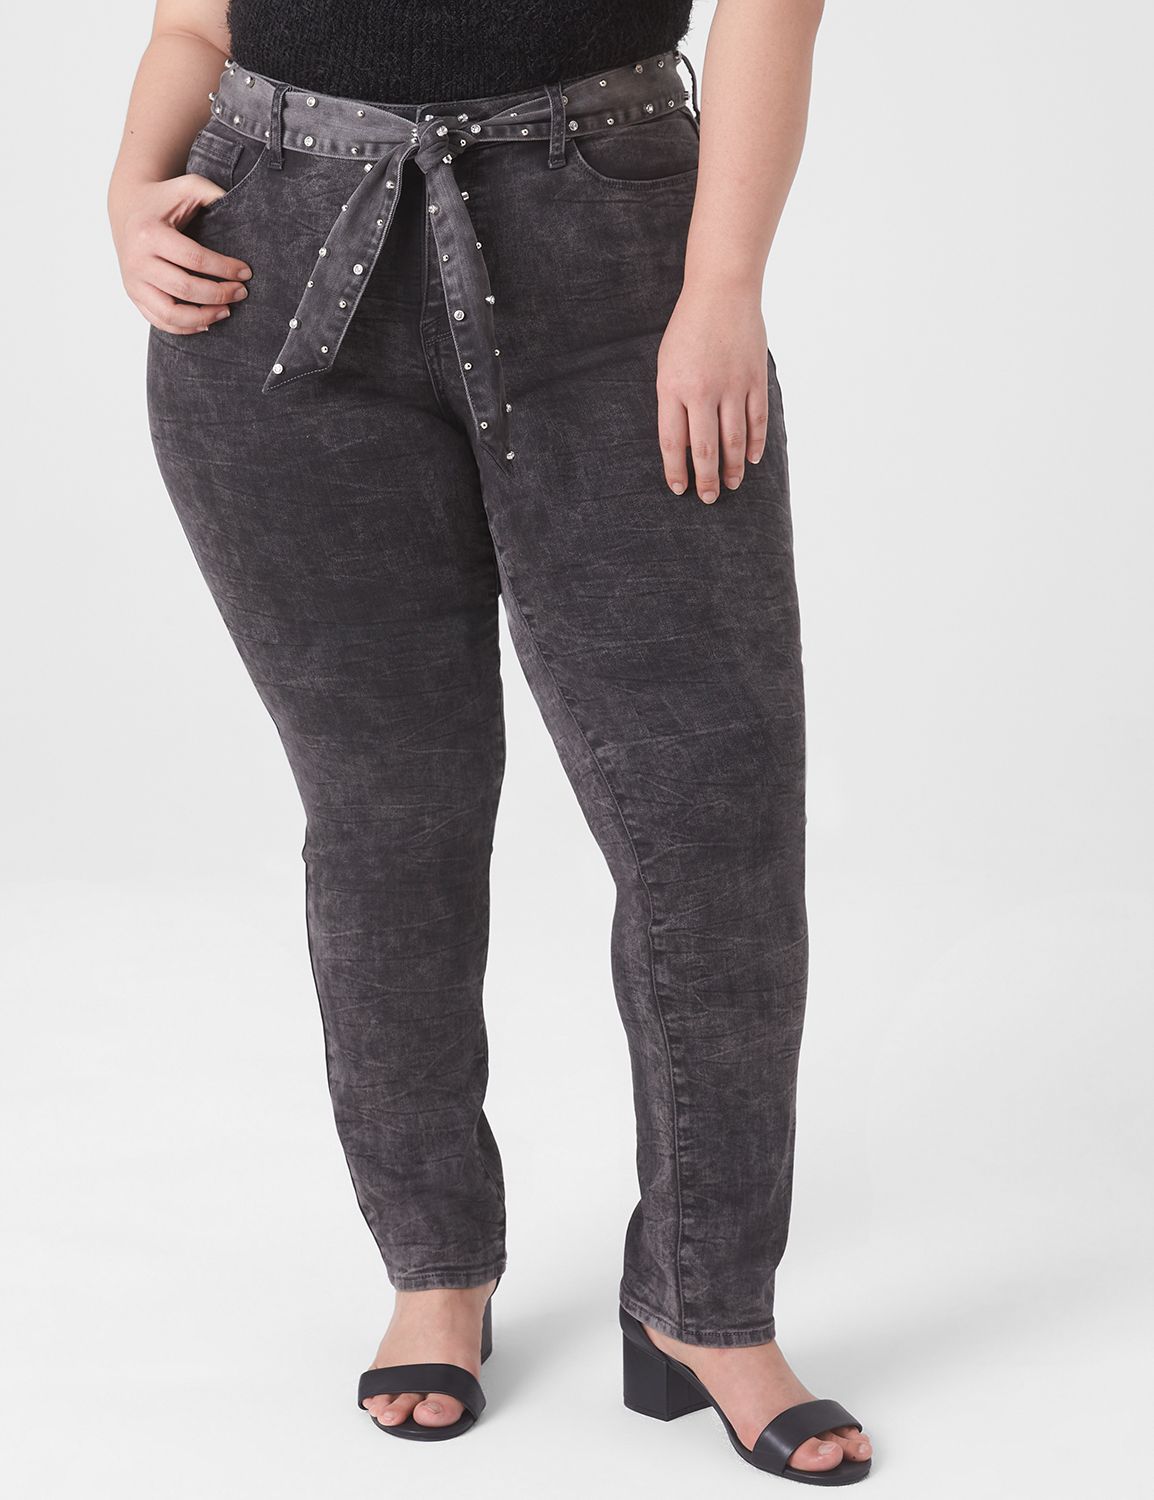 Responsible, Black Curvy-Fit Jeggings with Rhinestone Side Seam